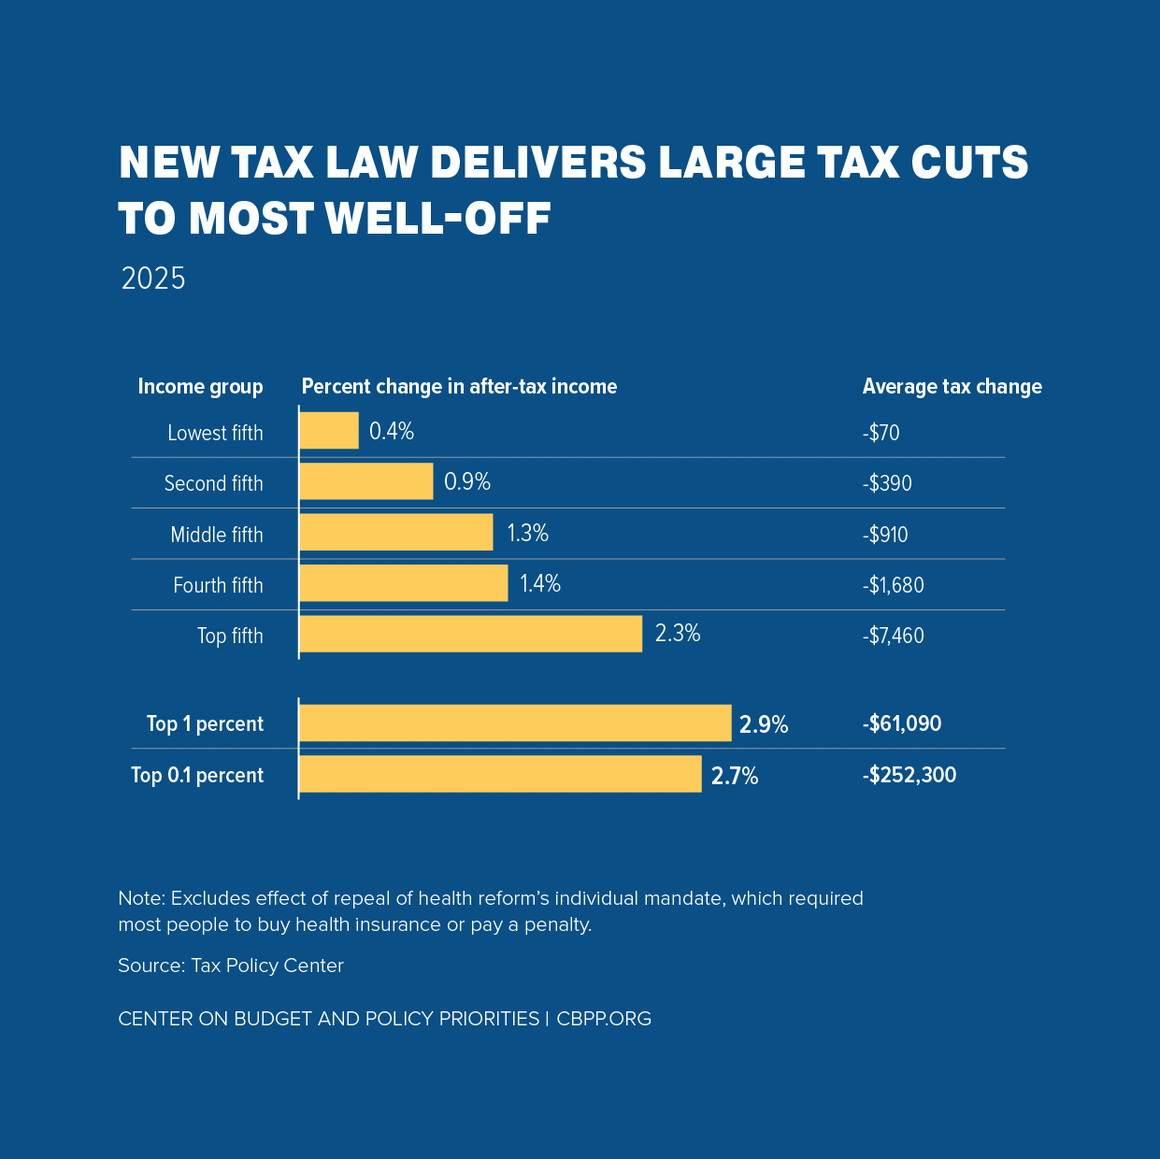 New Tax Law Delivers Large Tax Cuts to Most Well-Off